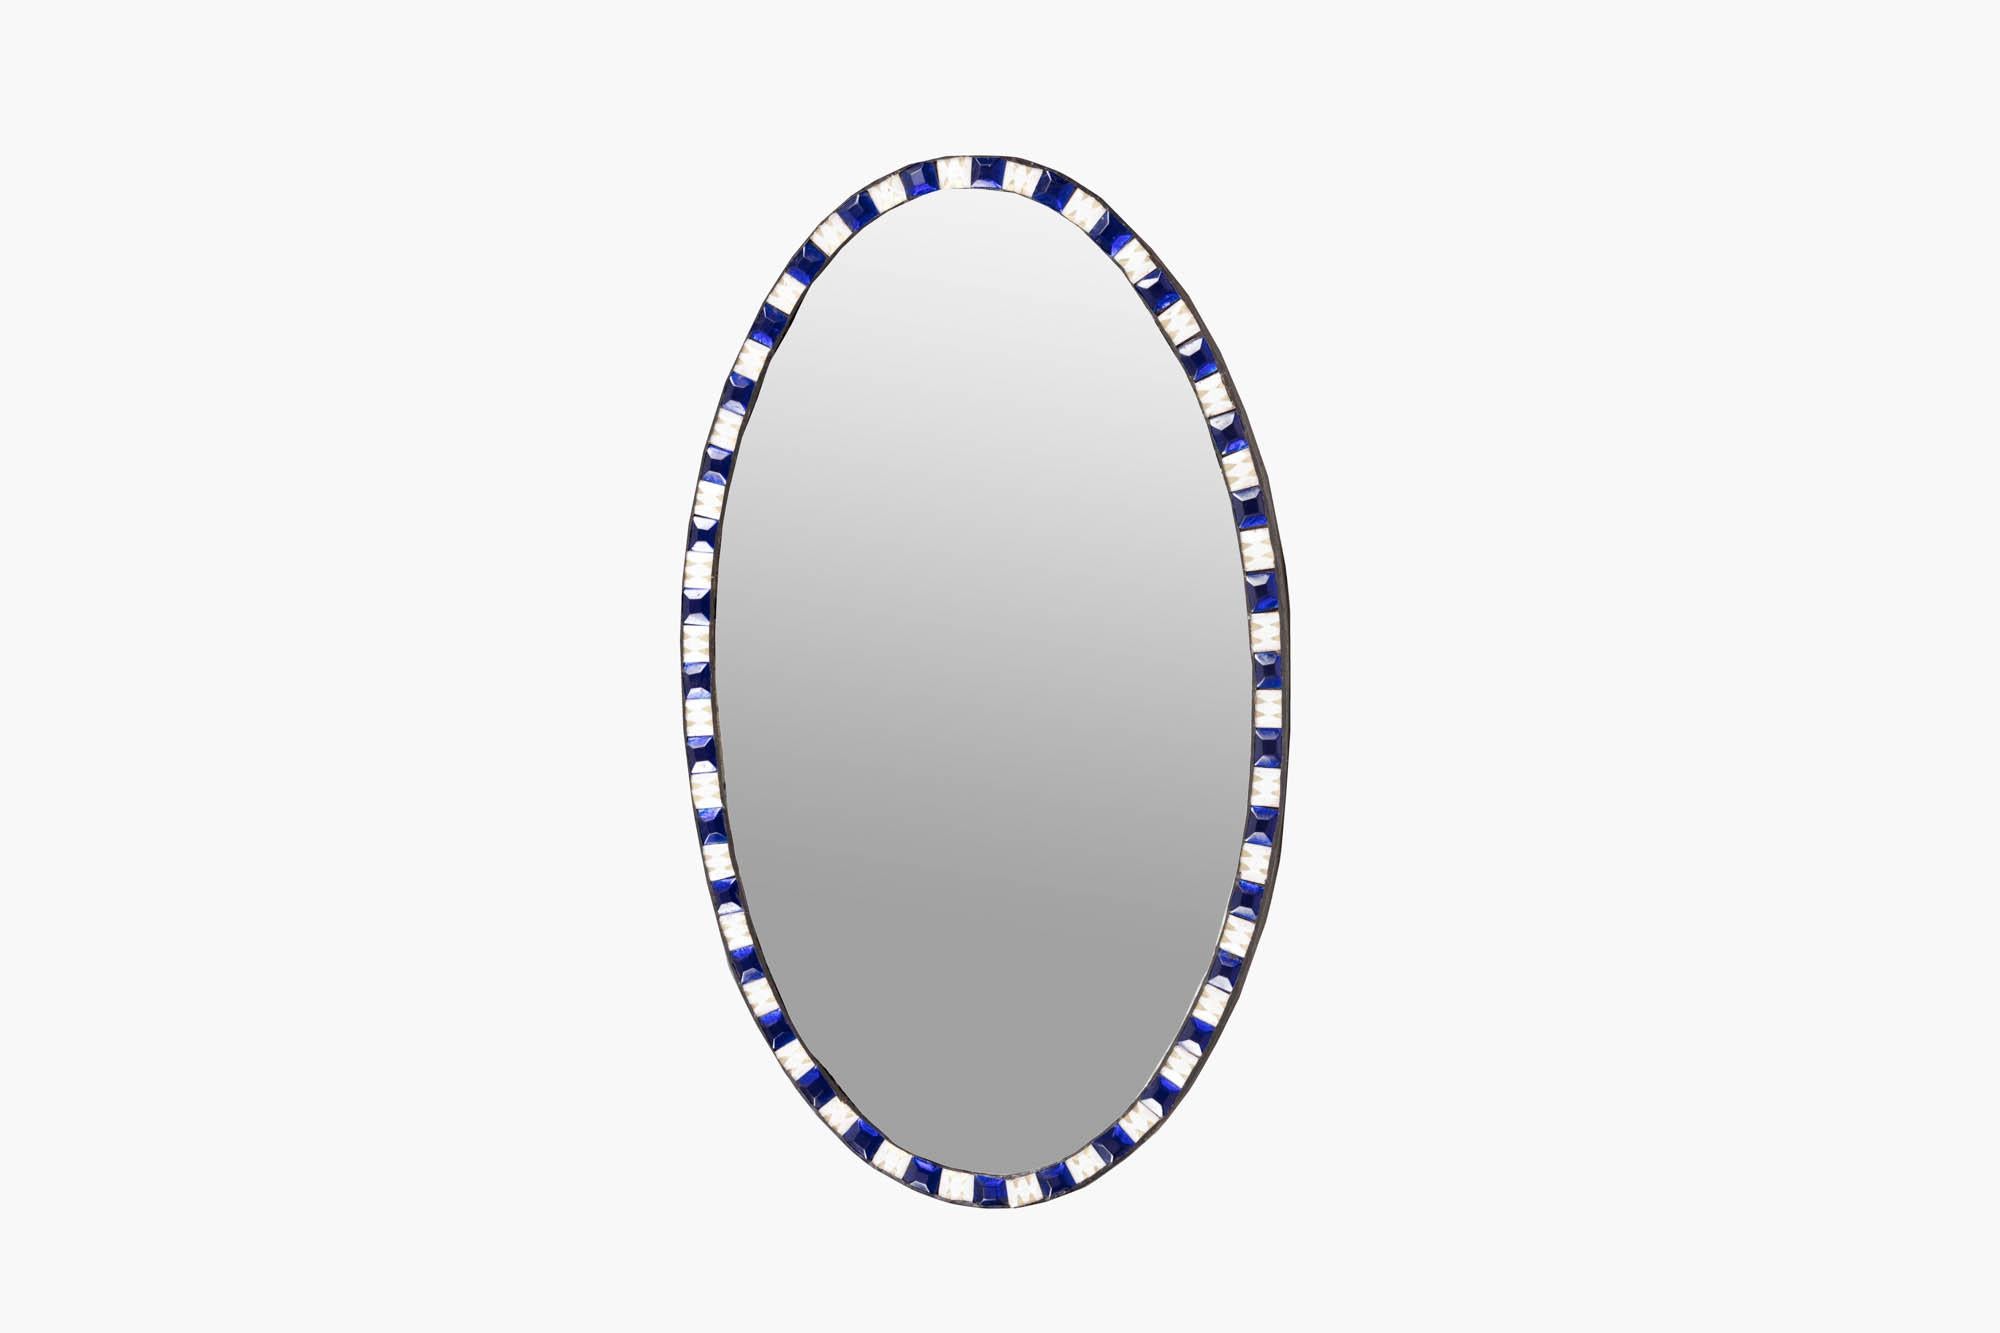 19th Century Irish Waterford mirror complete with period plate of oval form, and decorative beveling to the outer edge. It is set within frame of alternating faceted blue and clear glass studs.

Circa 1840.